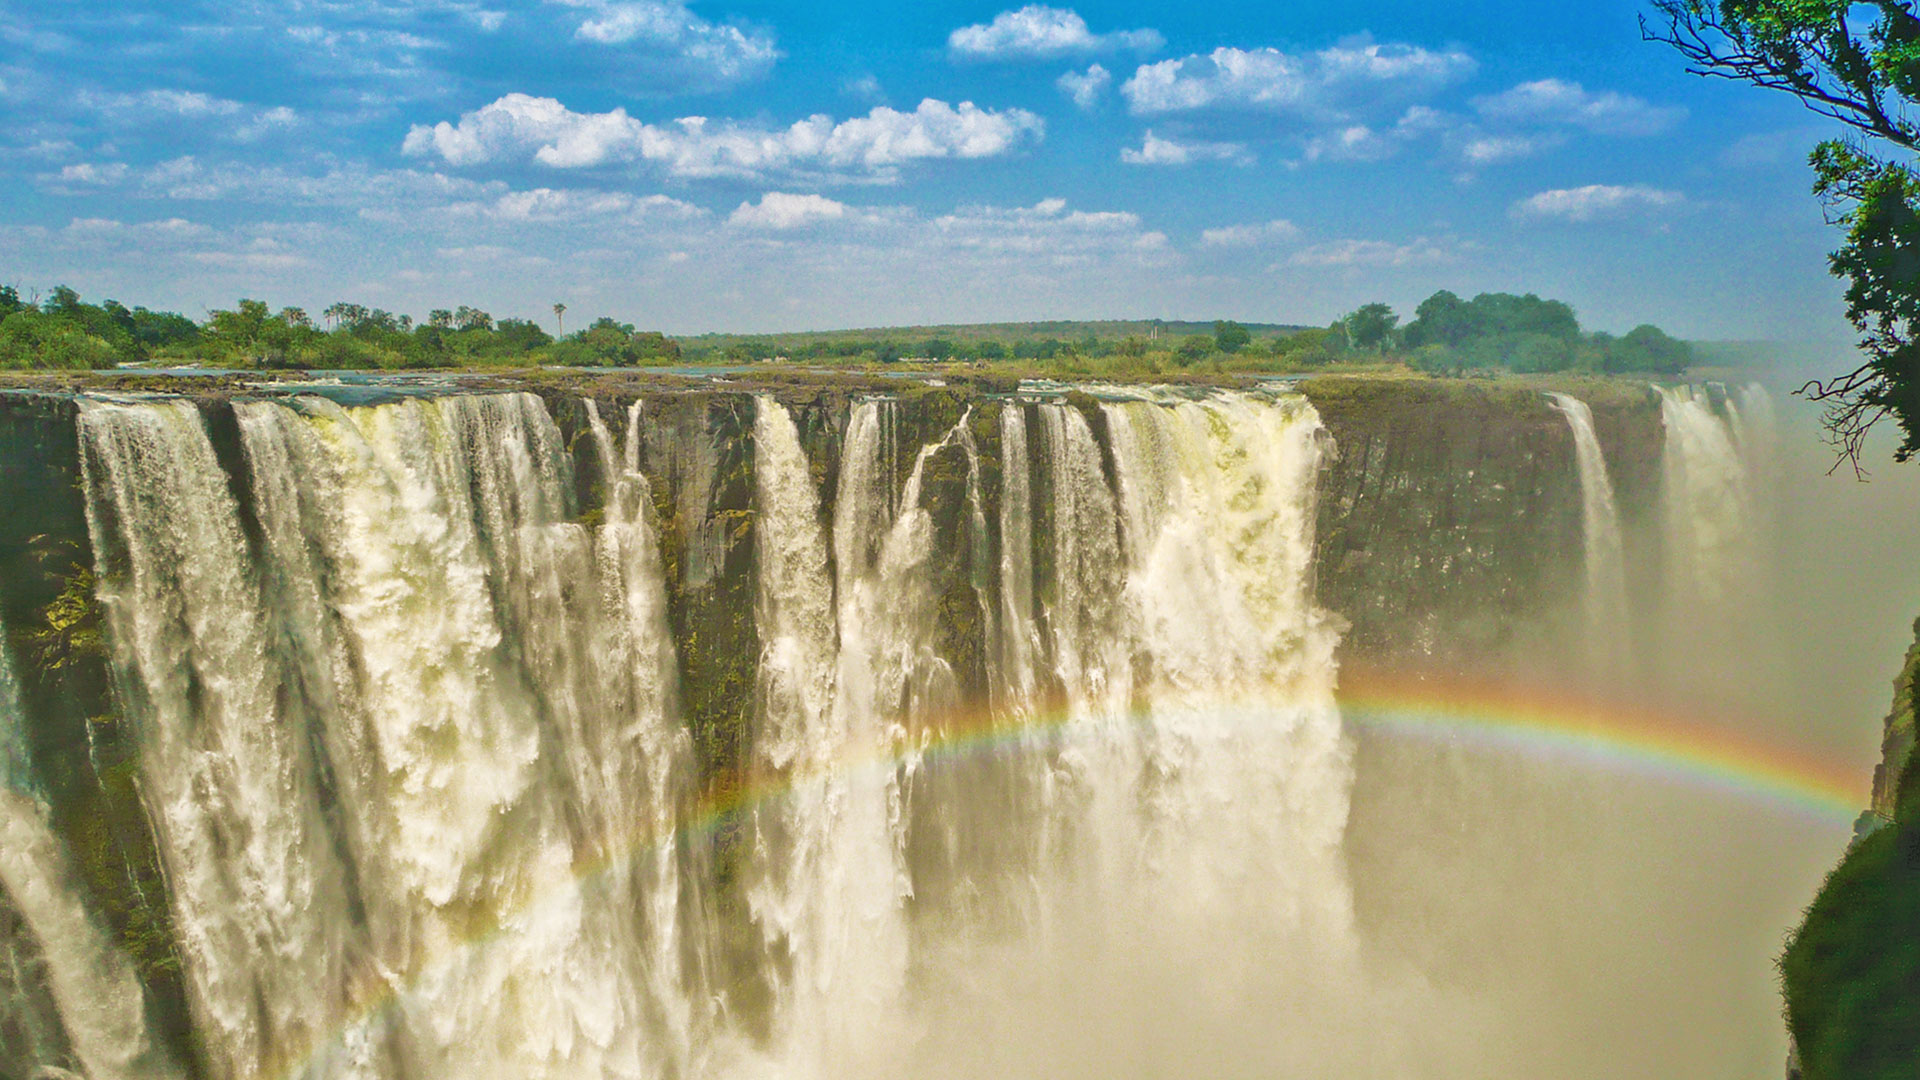 Experience the spectacular Victoria Falls!